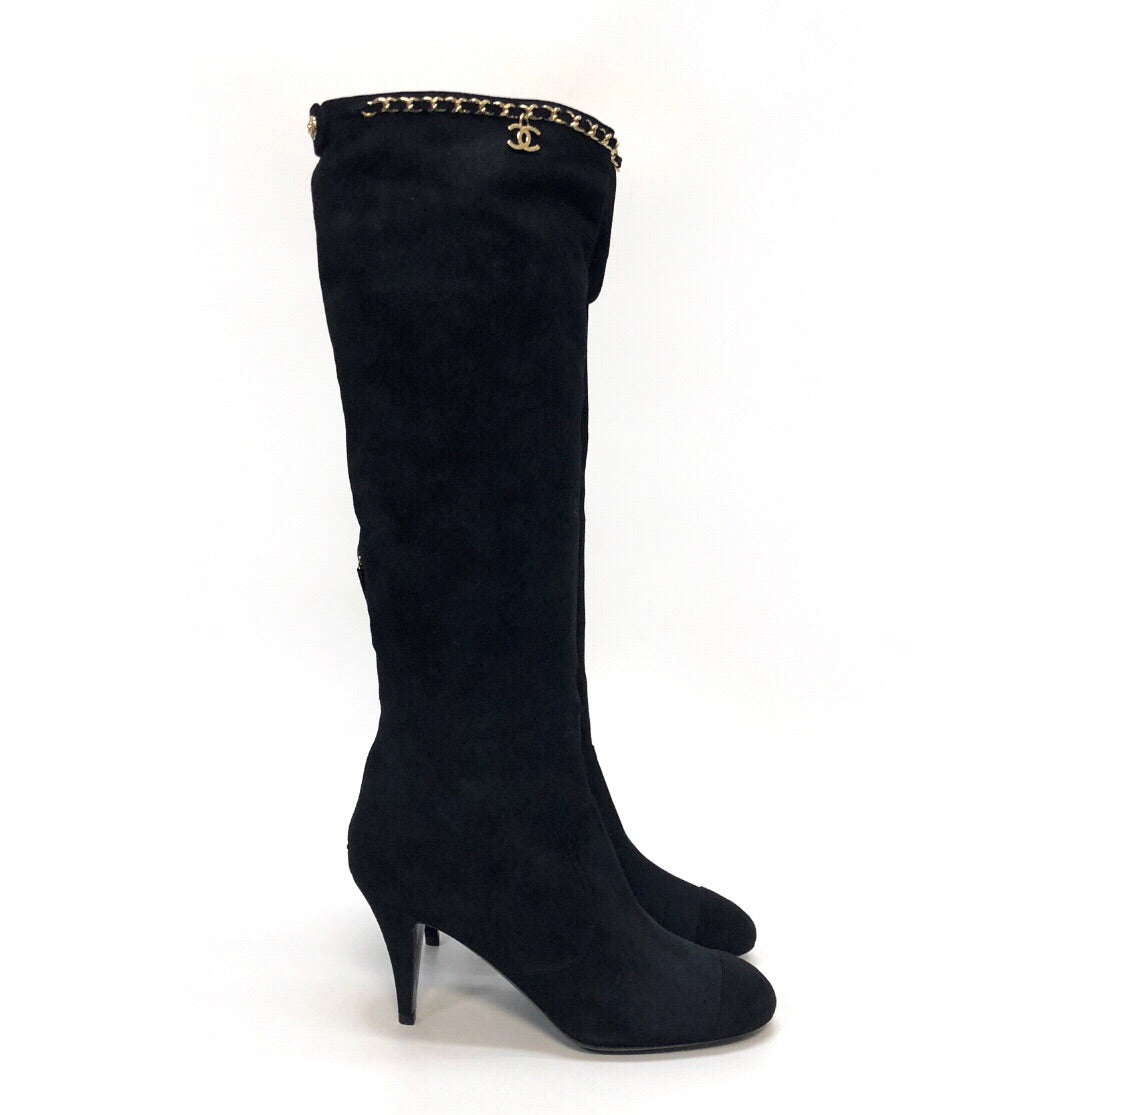 Chanel Chain Trim Knee High Boots